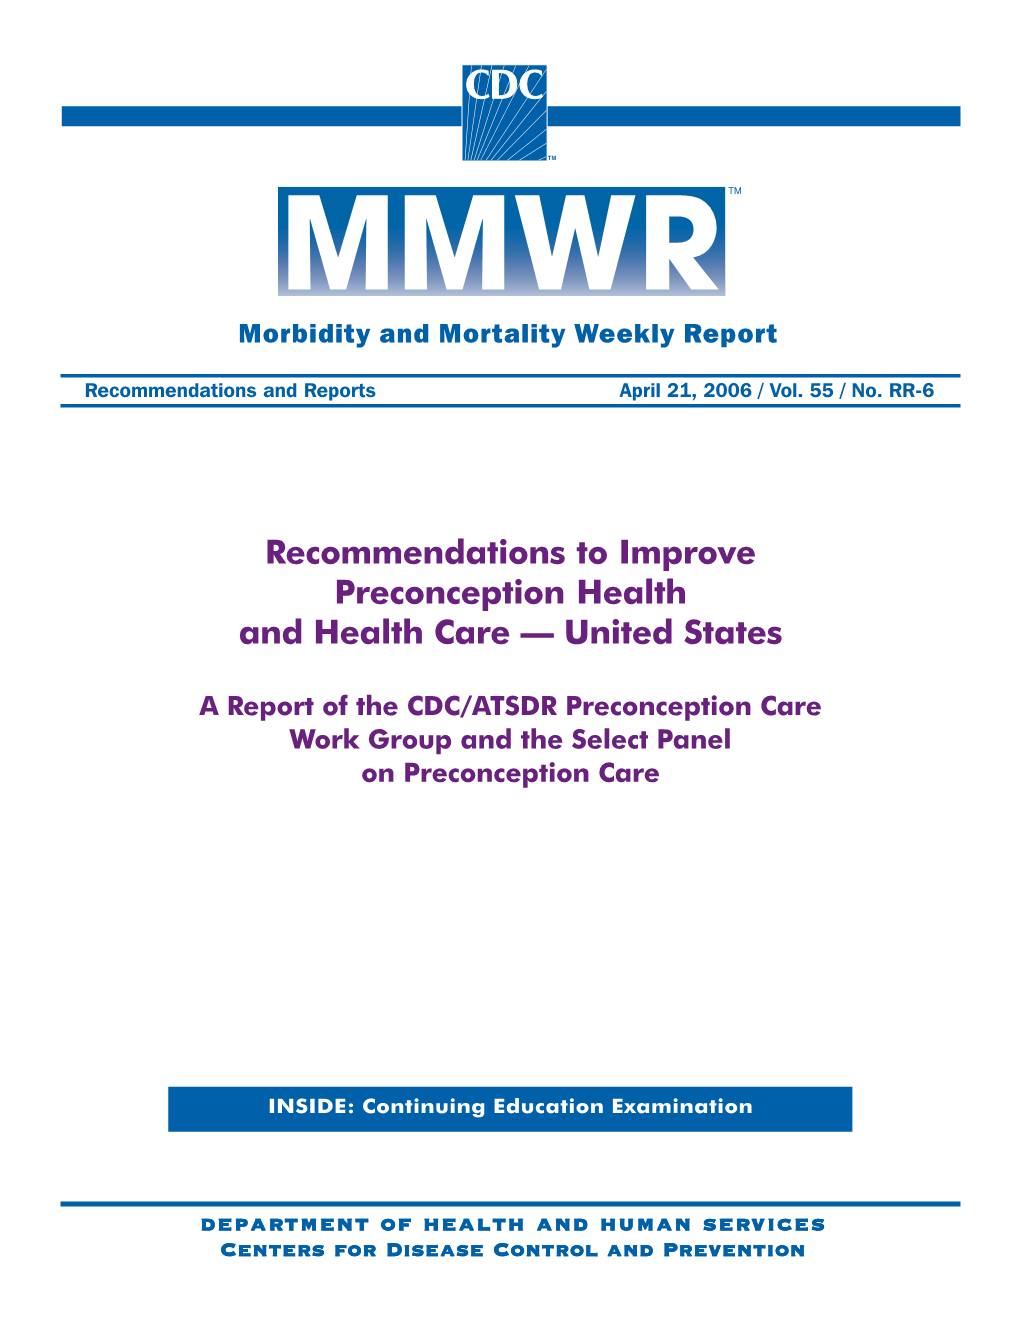 Recommendations to Improve Preconception Health and Health Care — United States